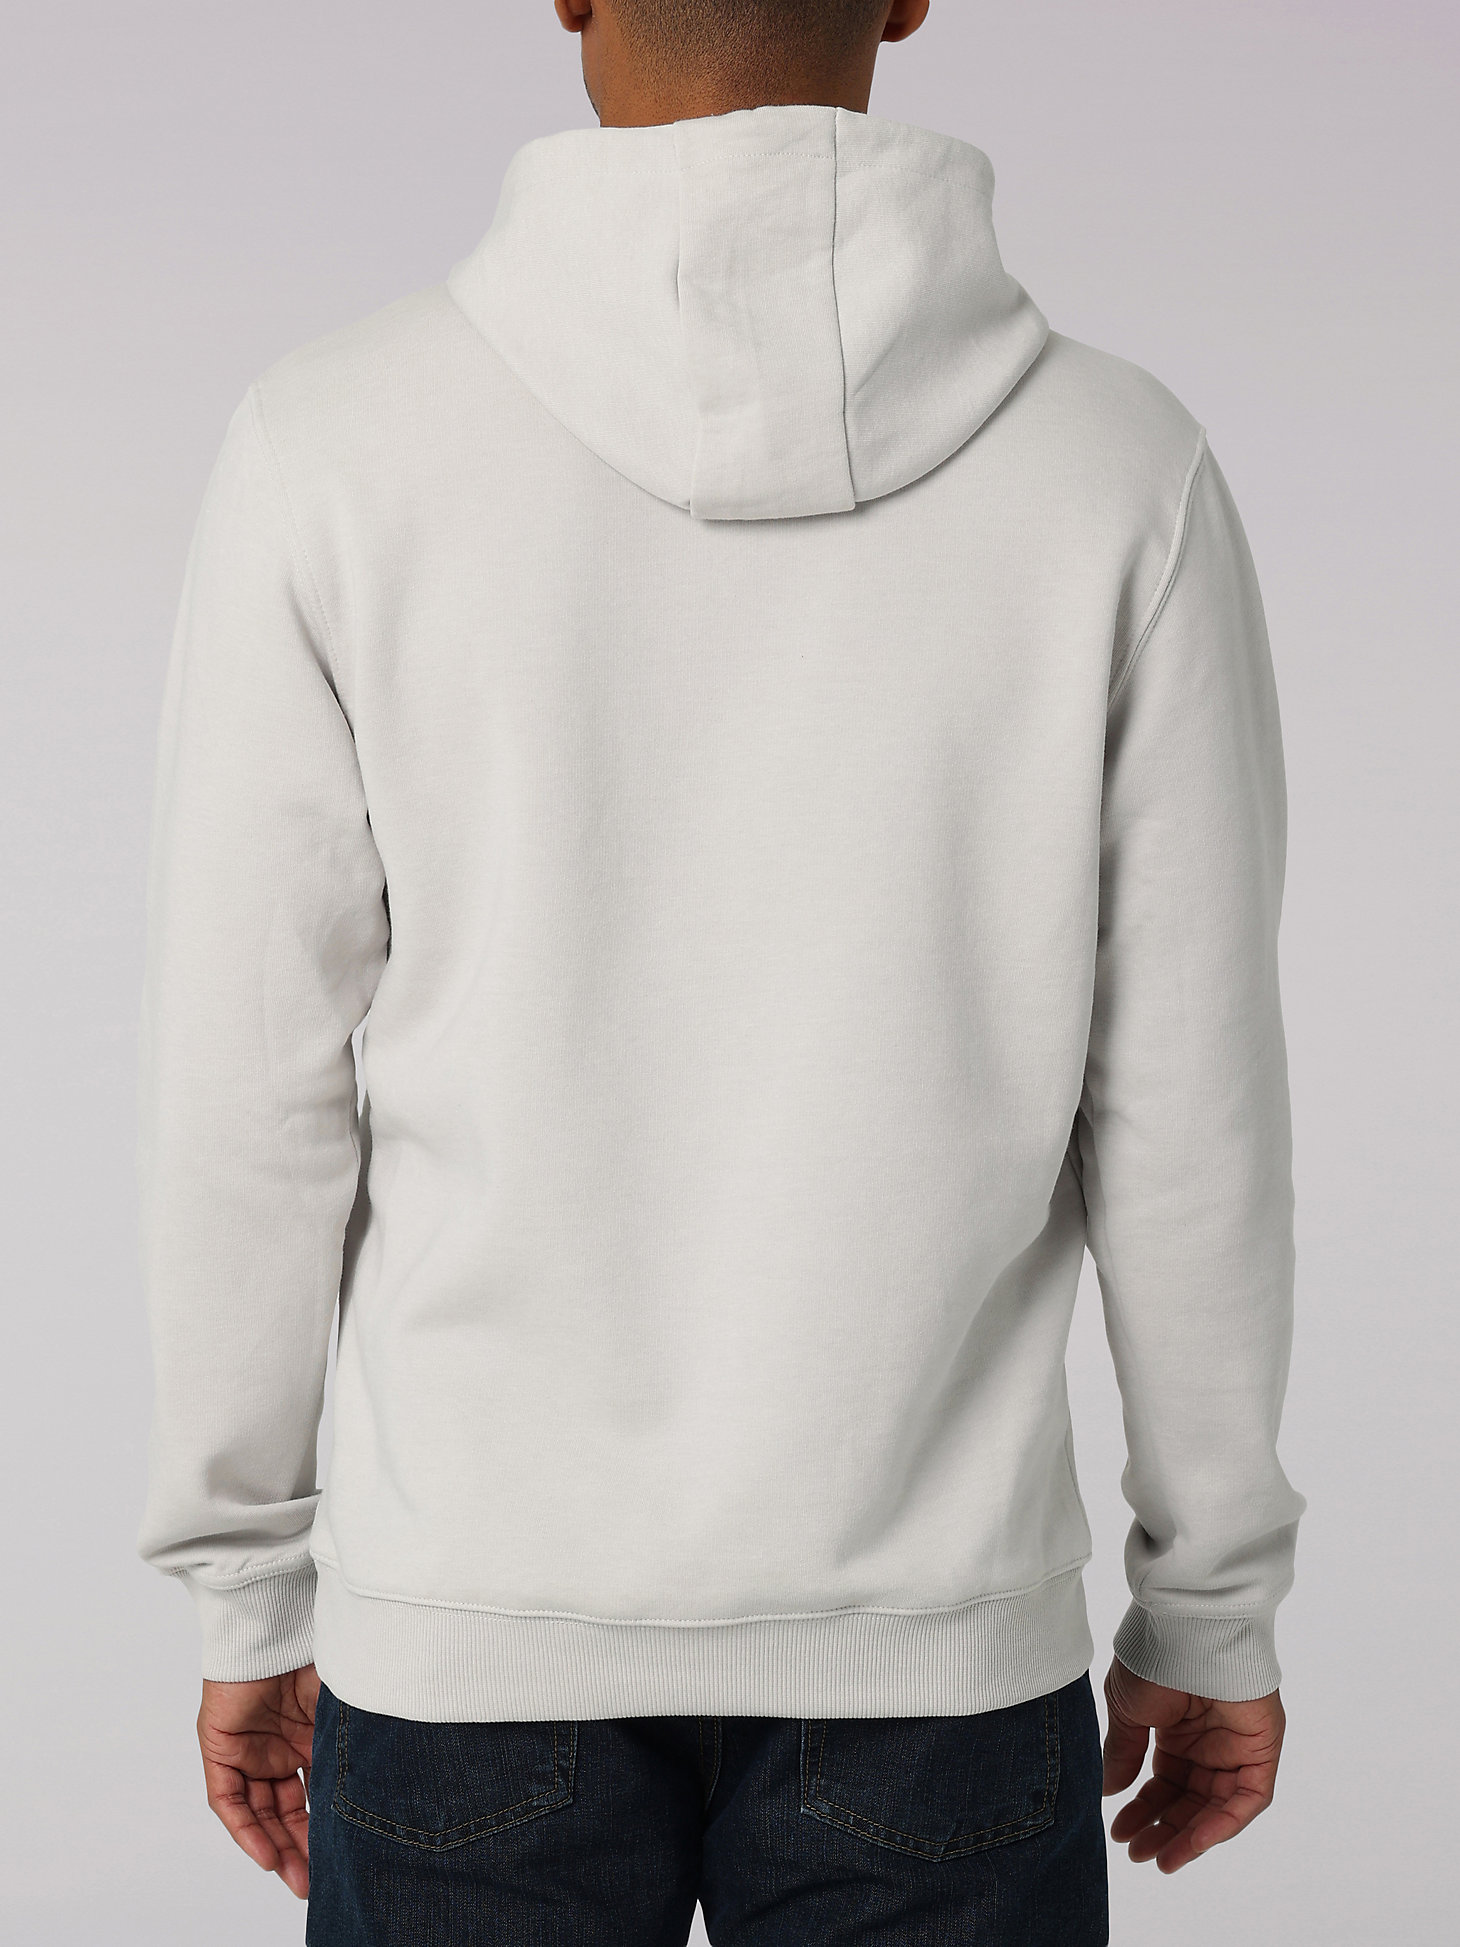 Men's Crafted with Purpose Graphic Hoodie in Lunar Rock alternative view 1